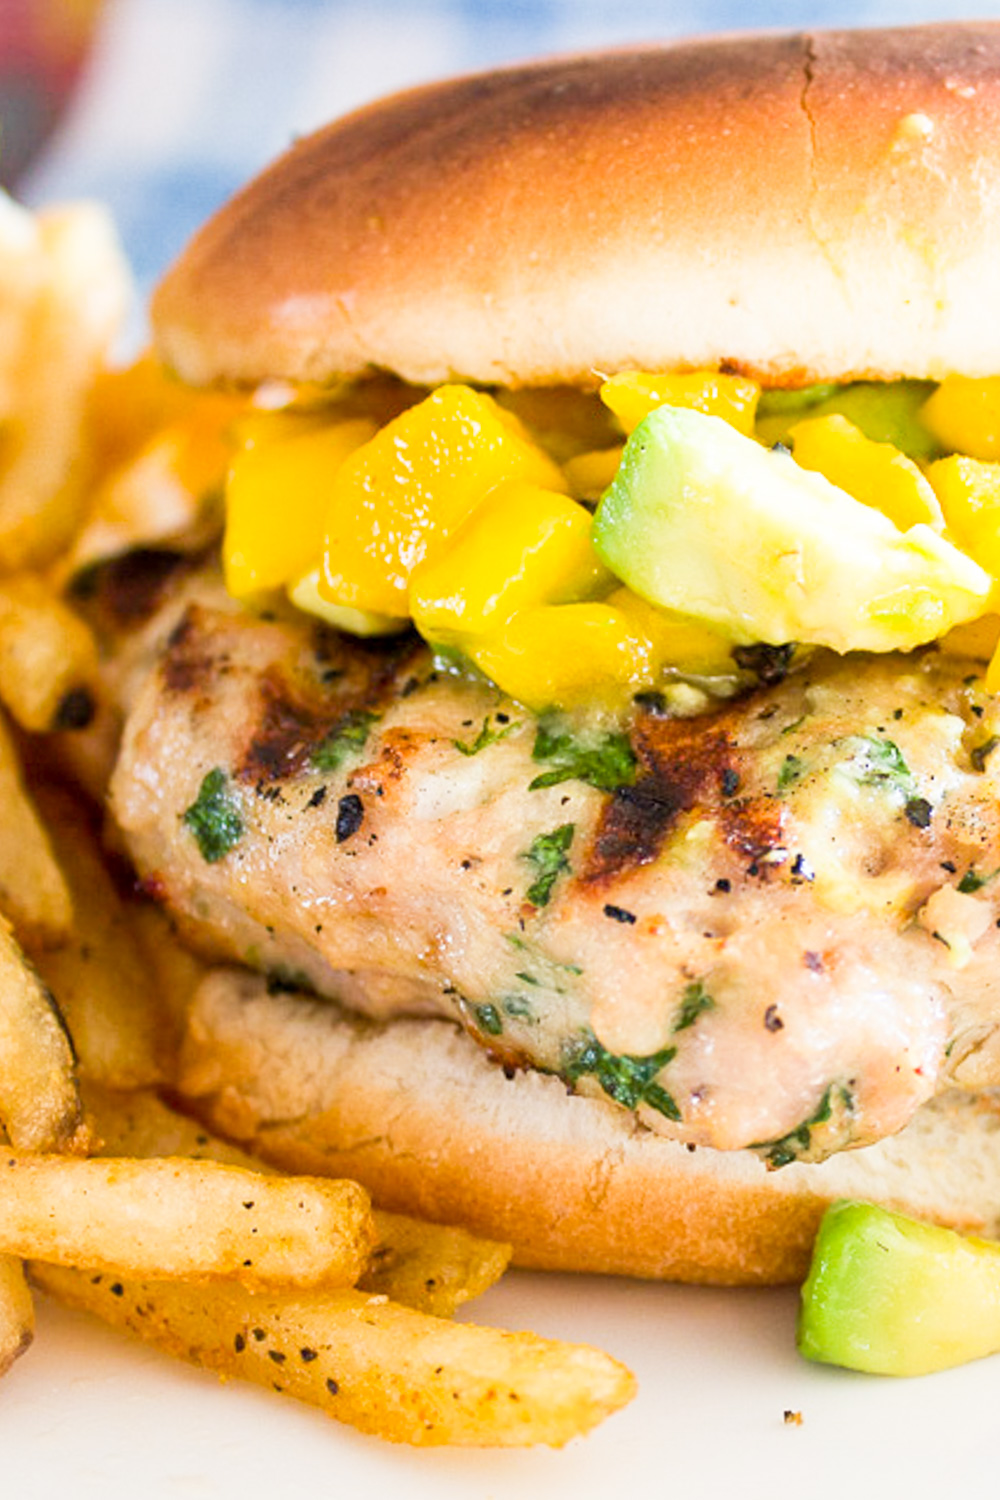 grilled chicken burger with mango salsa with fries on plate.